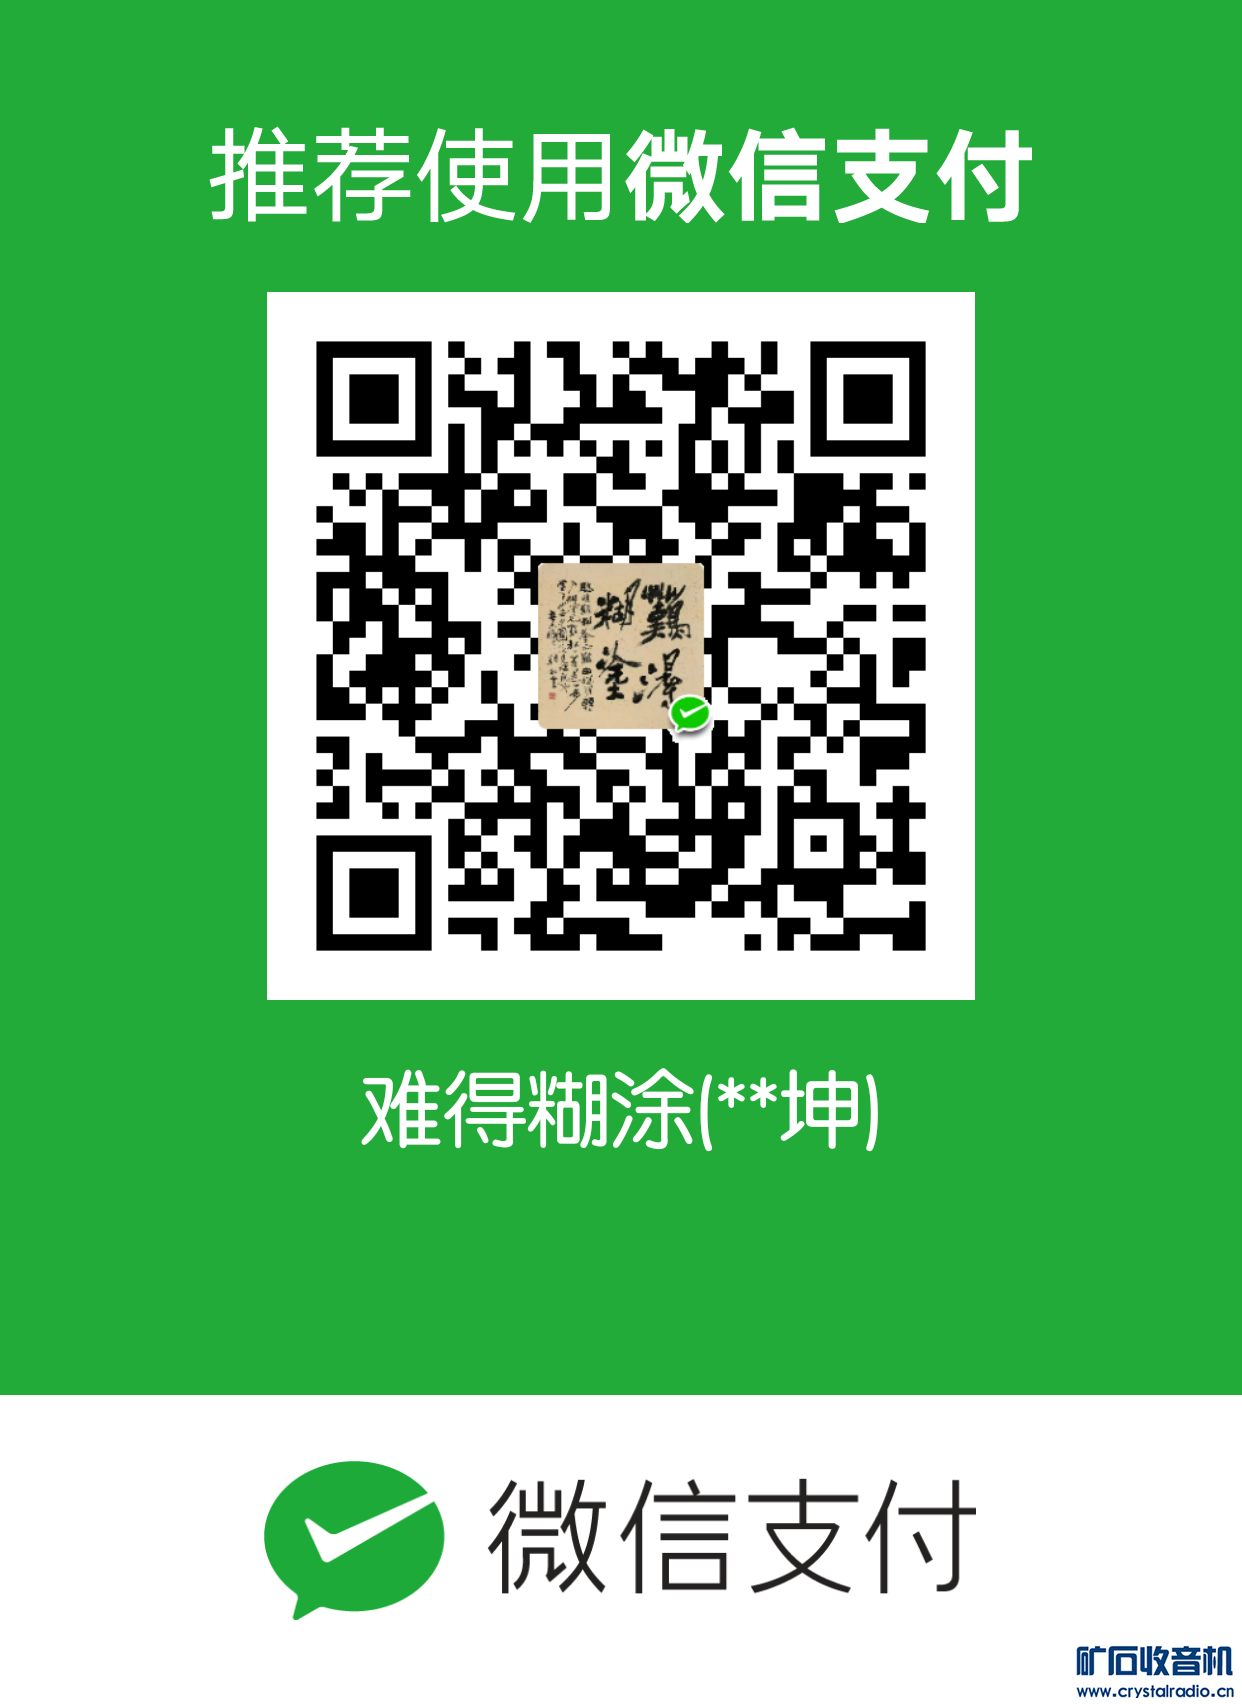 mm_facetoface_collect_qrcode_1637472994588.png